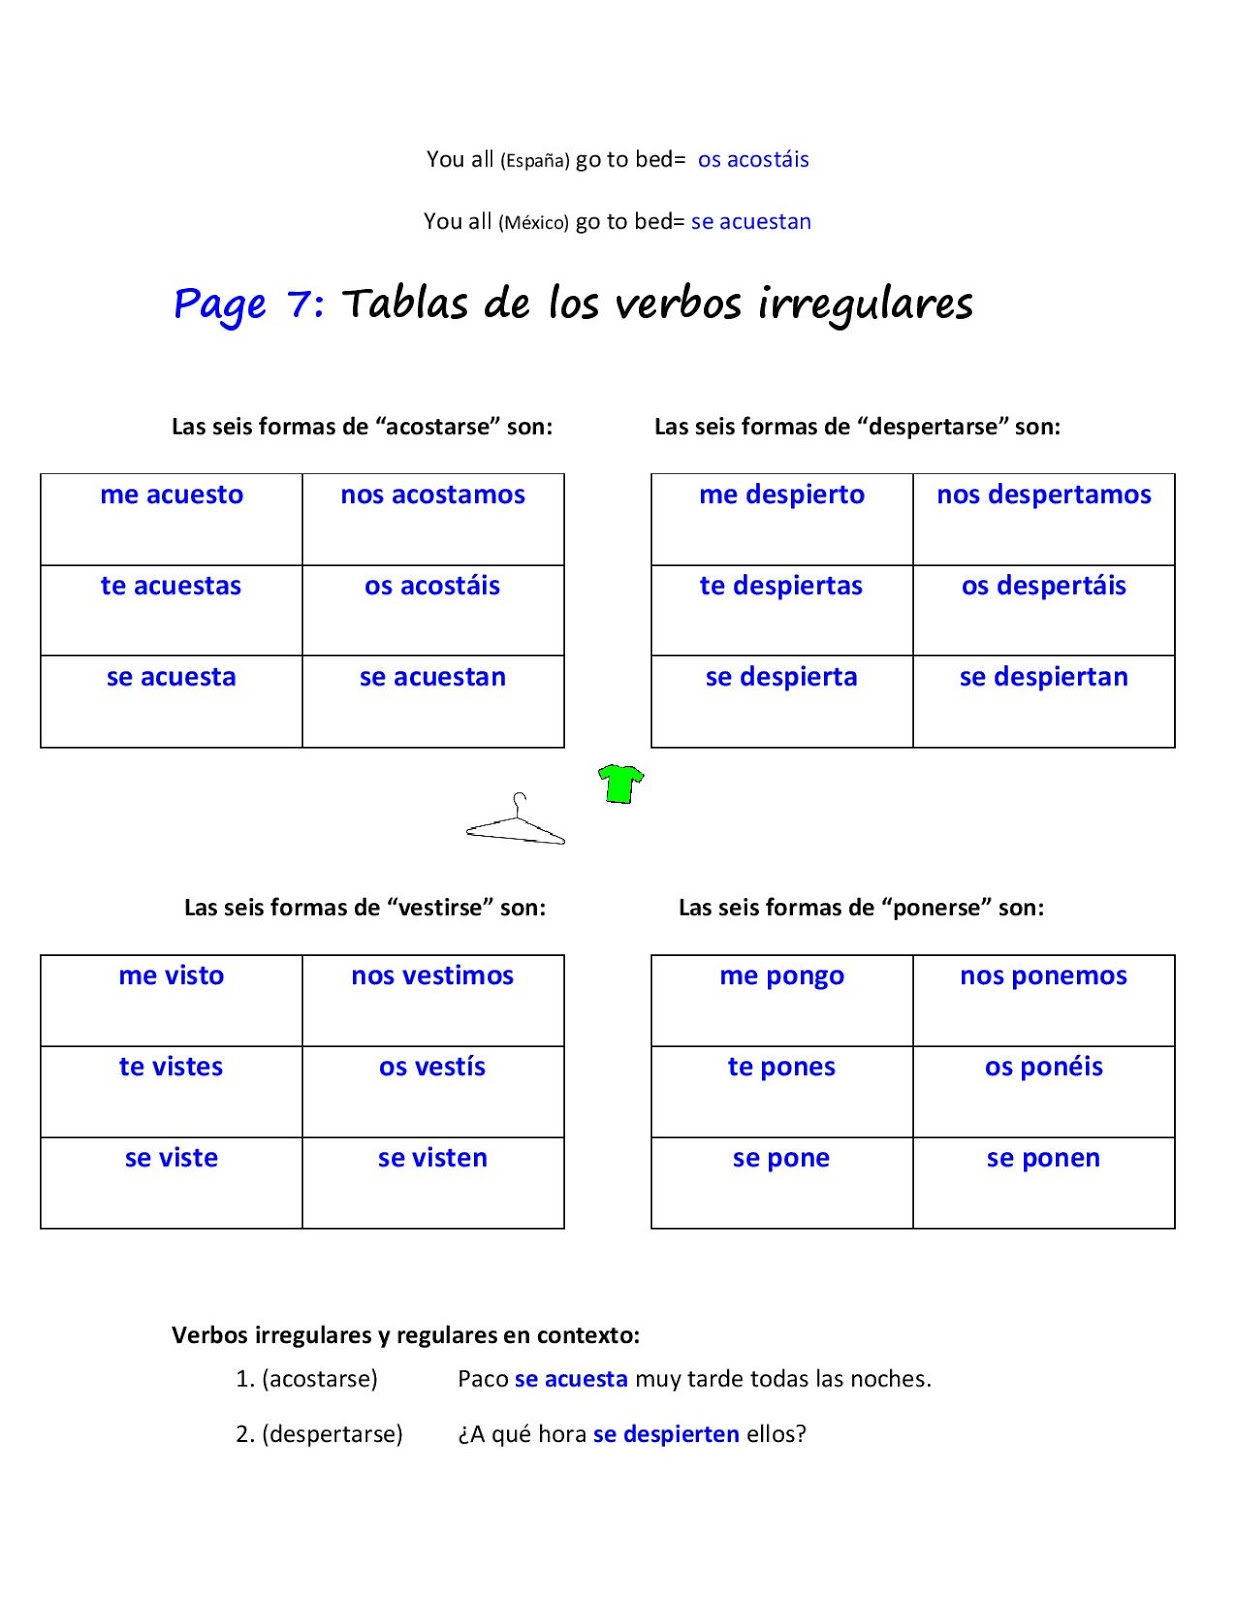 clases-de-espa-ol-answer-key-on-packet-given-tuesday-08-2015-reflexive-verbs